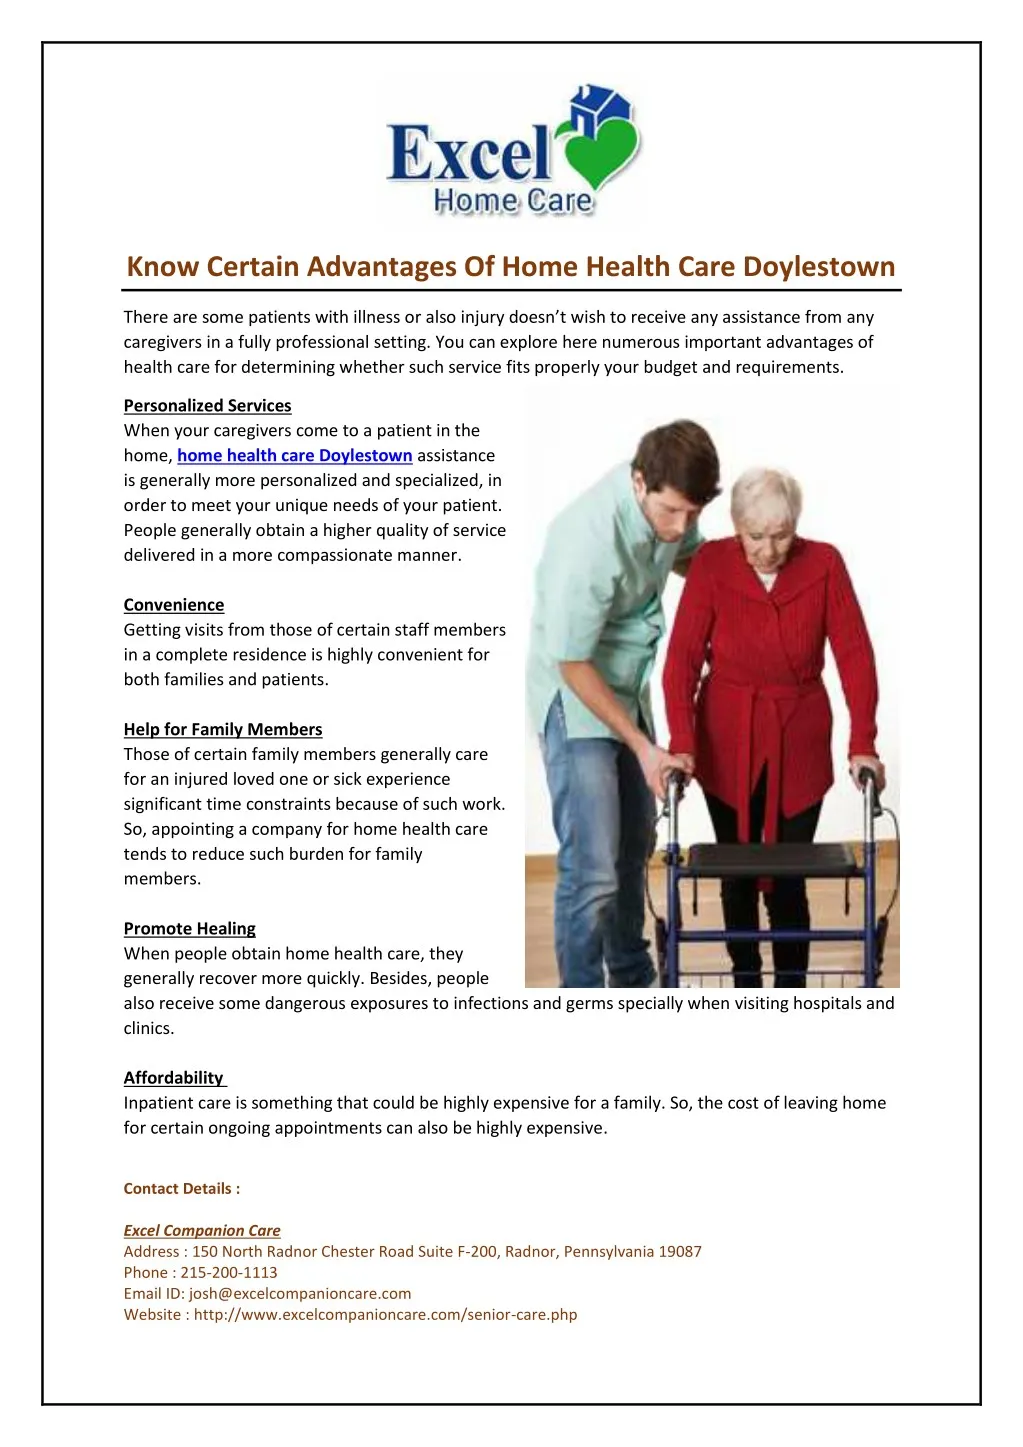 know certain advantages of home health care